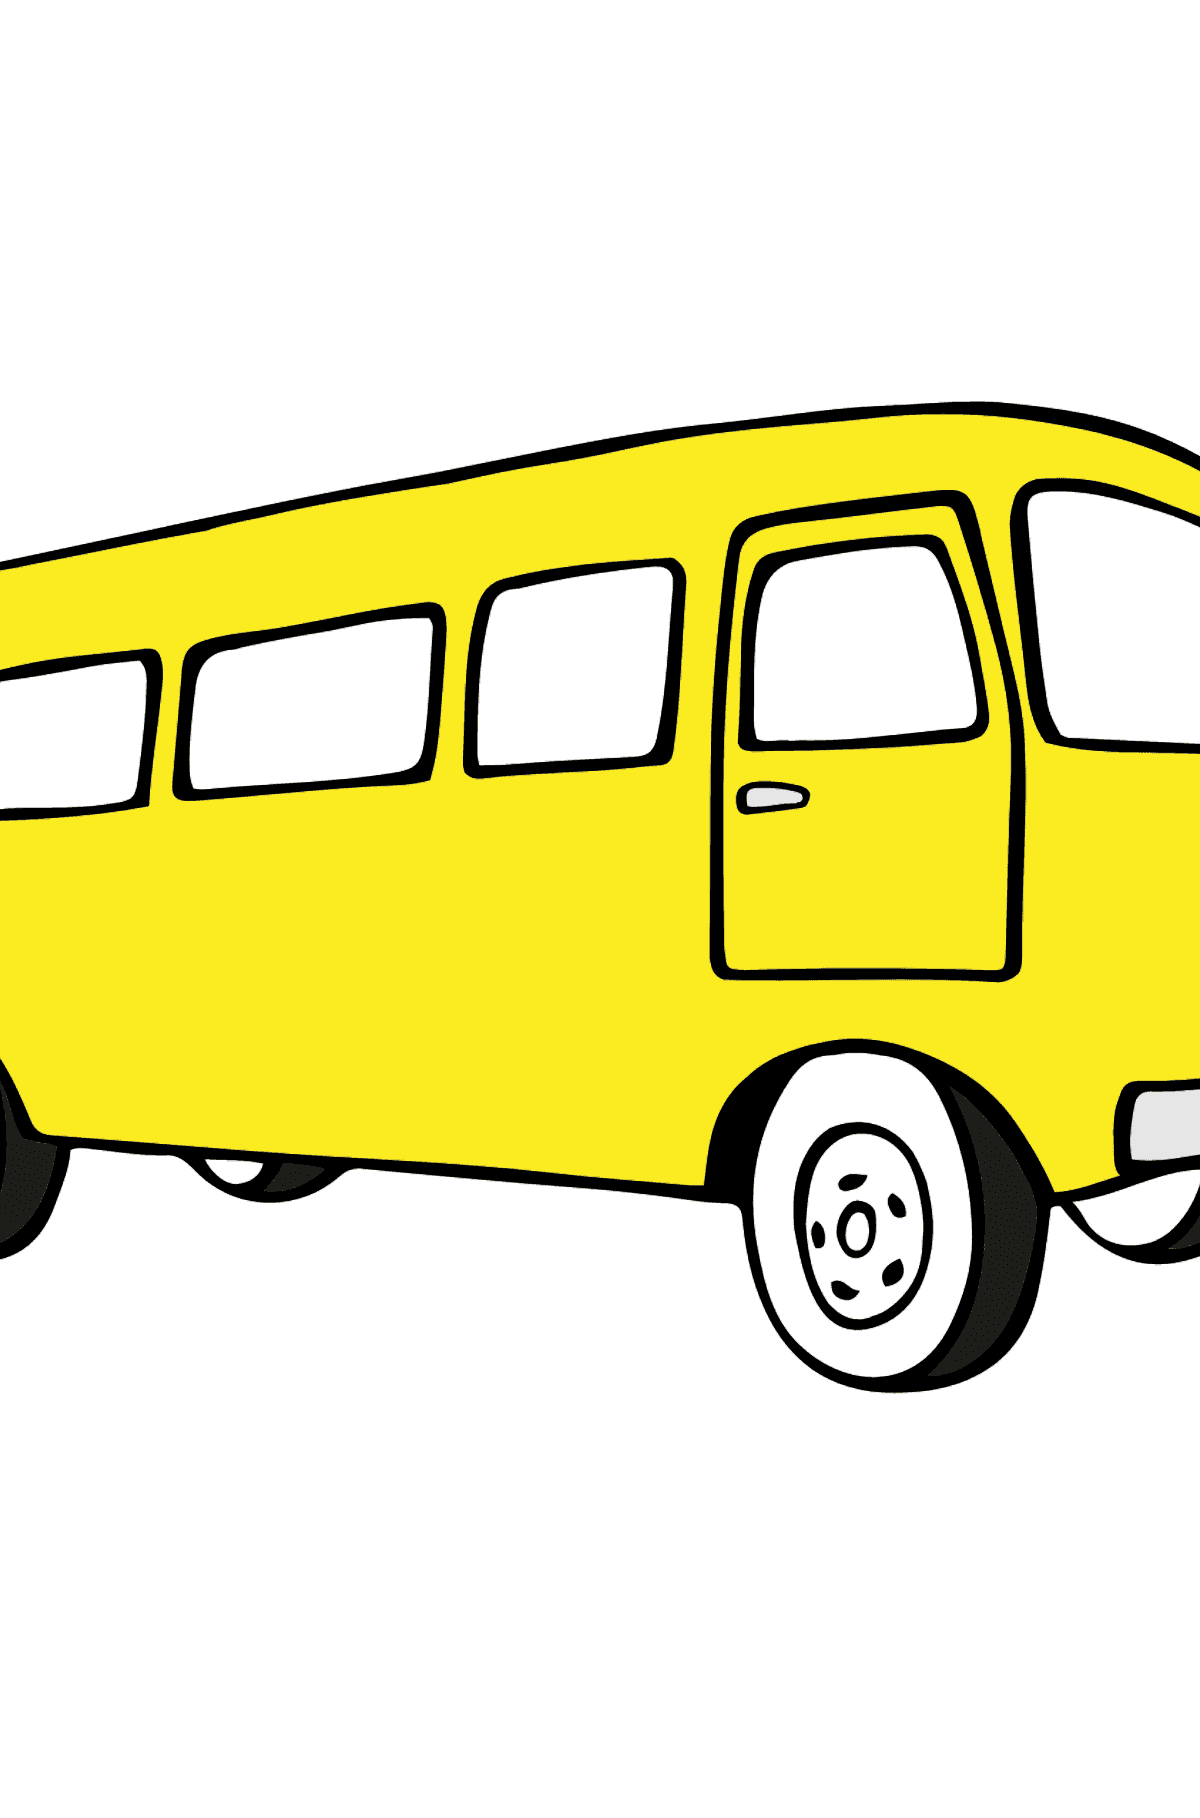 Simple Coloring Page - A Joyful Bus - Coloring Pages for Kids